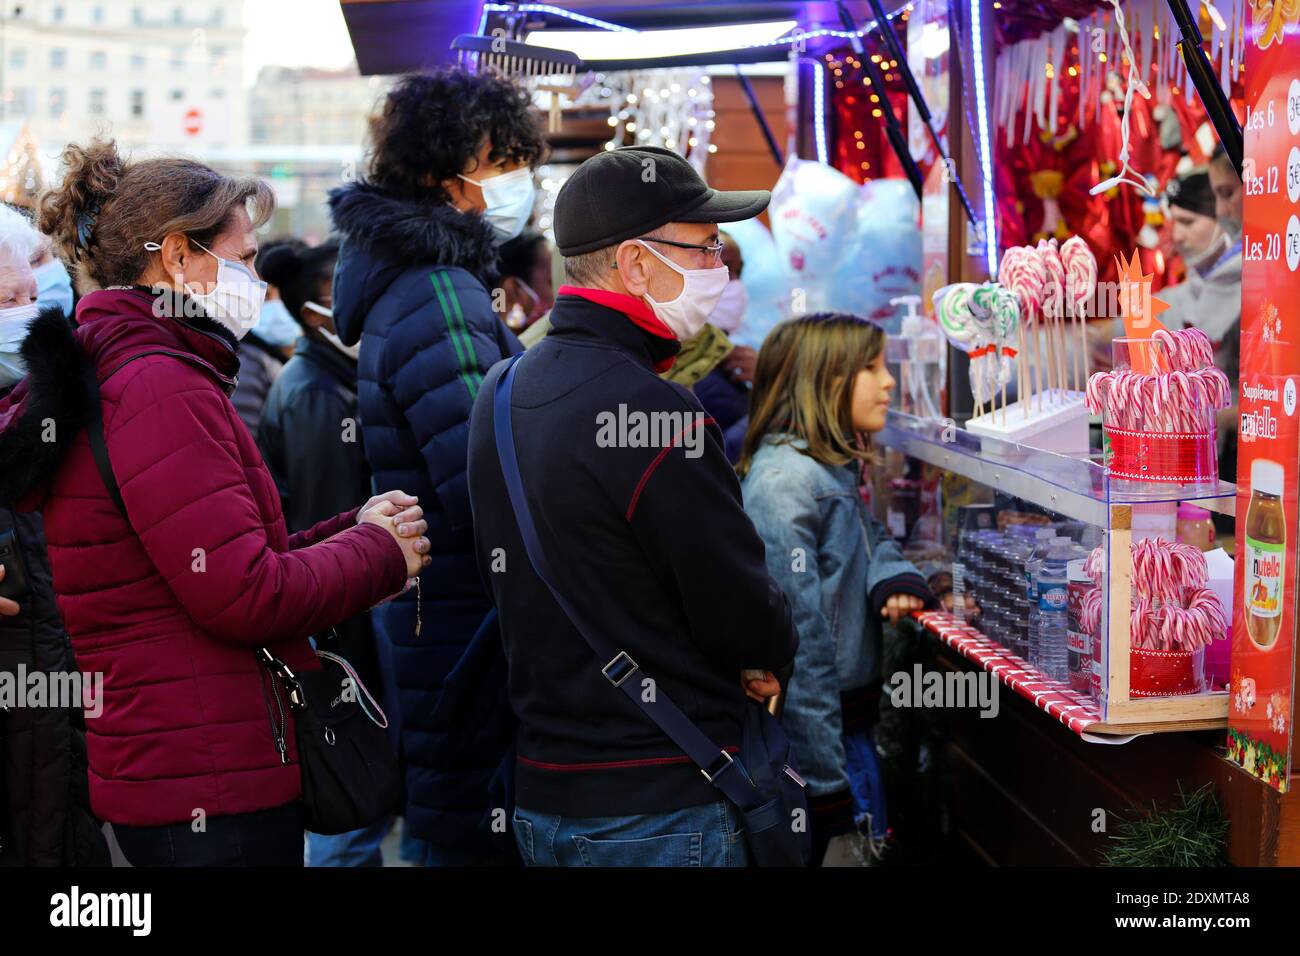 December 22, 2020: Marseille, France. 22 December 2020. People visit an open Christmas market in the French town of Marseille. France lifted of a major lockdown on December 15th and allowed stalls in Christmas markets to be open as the festive season approached amid the Covid pandemic Credit: Louai Barakat/IMAGESLIVE/ZUMA Wire/Alamy Live News Stock Photo